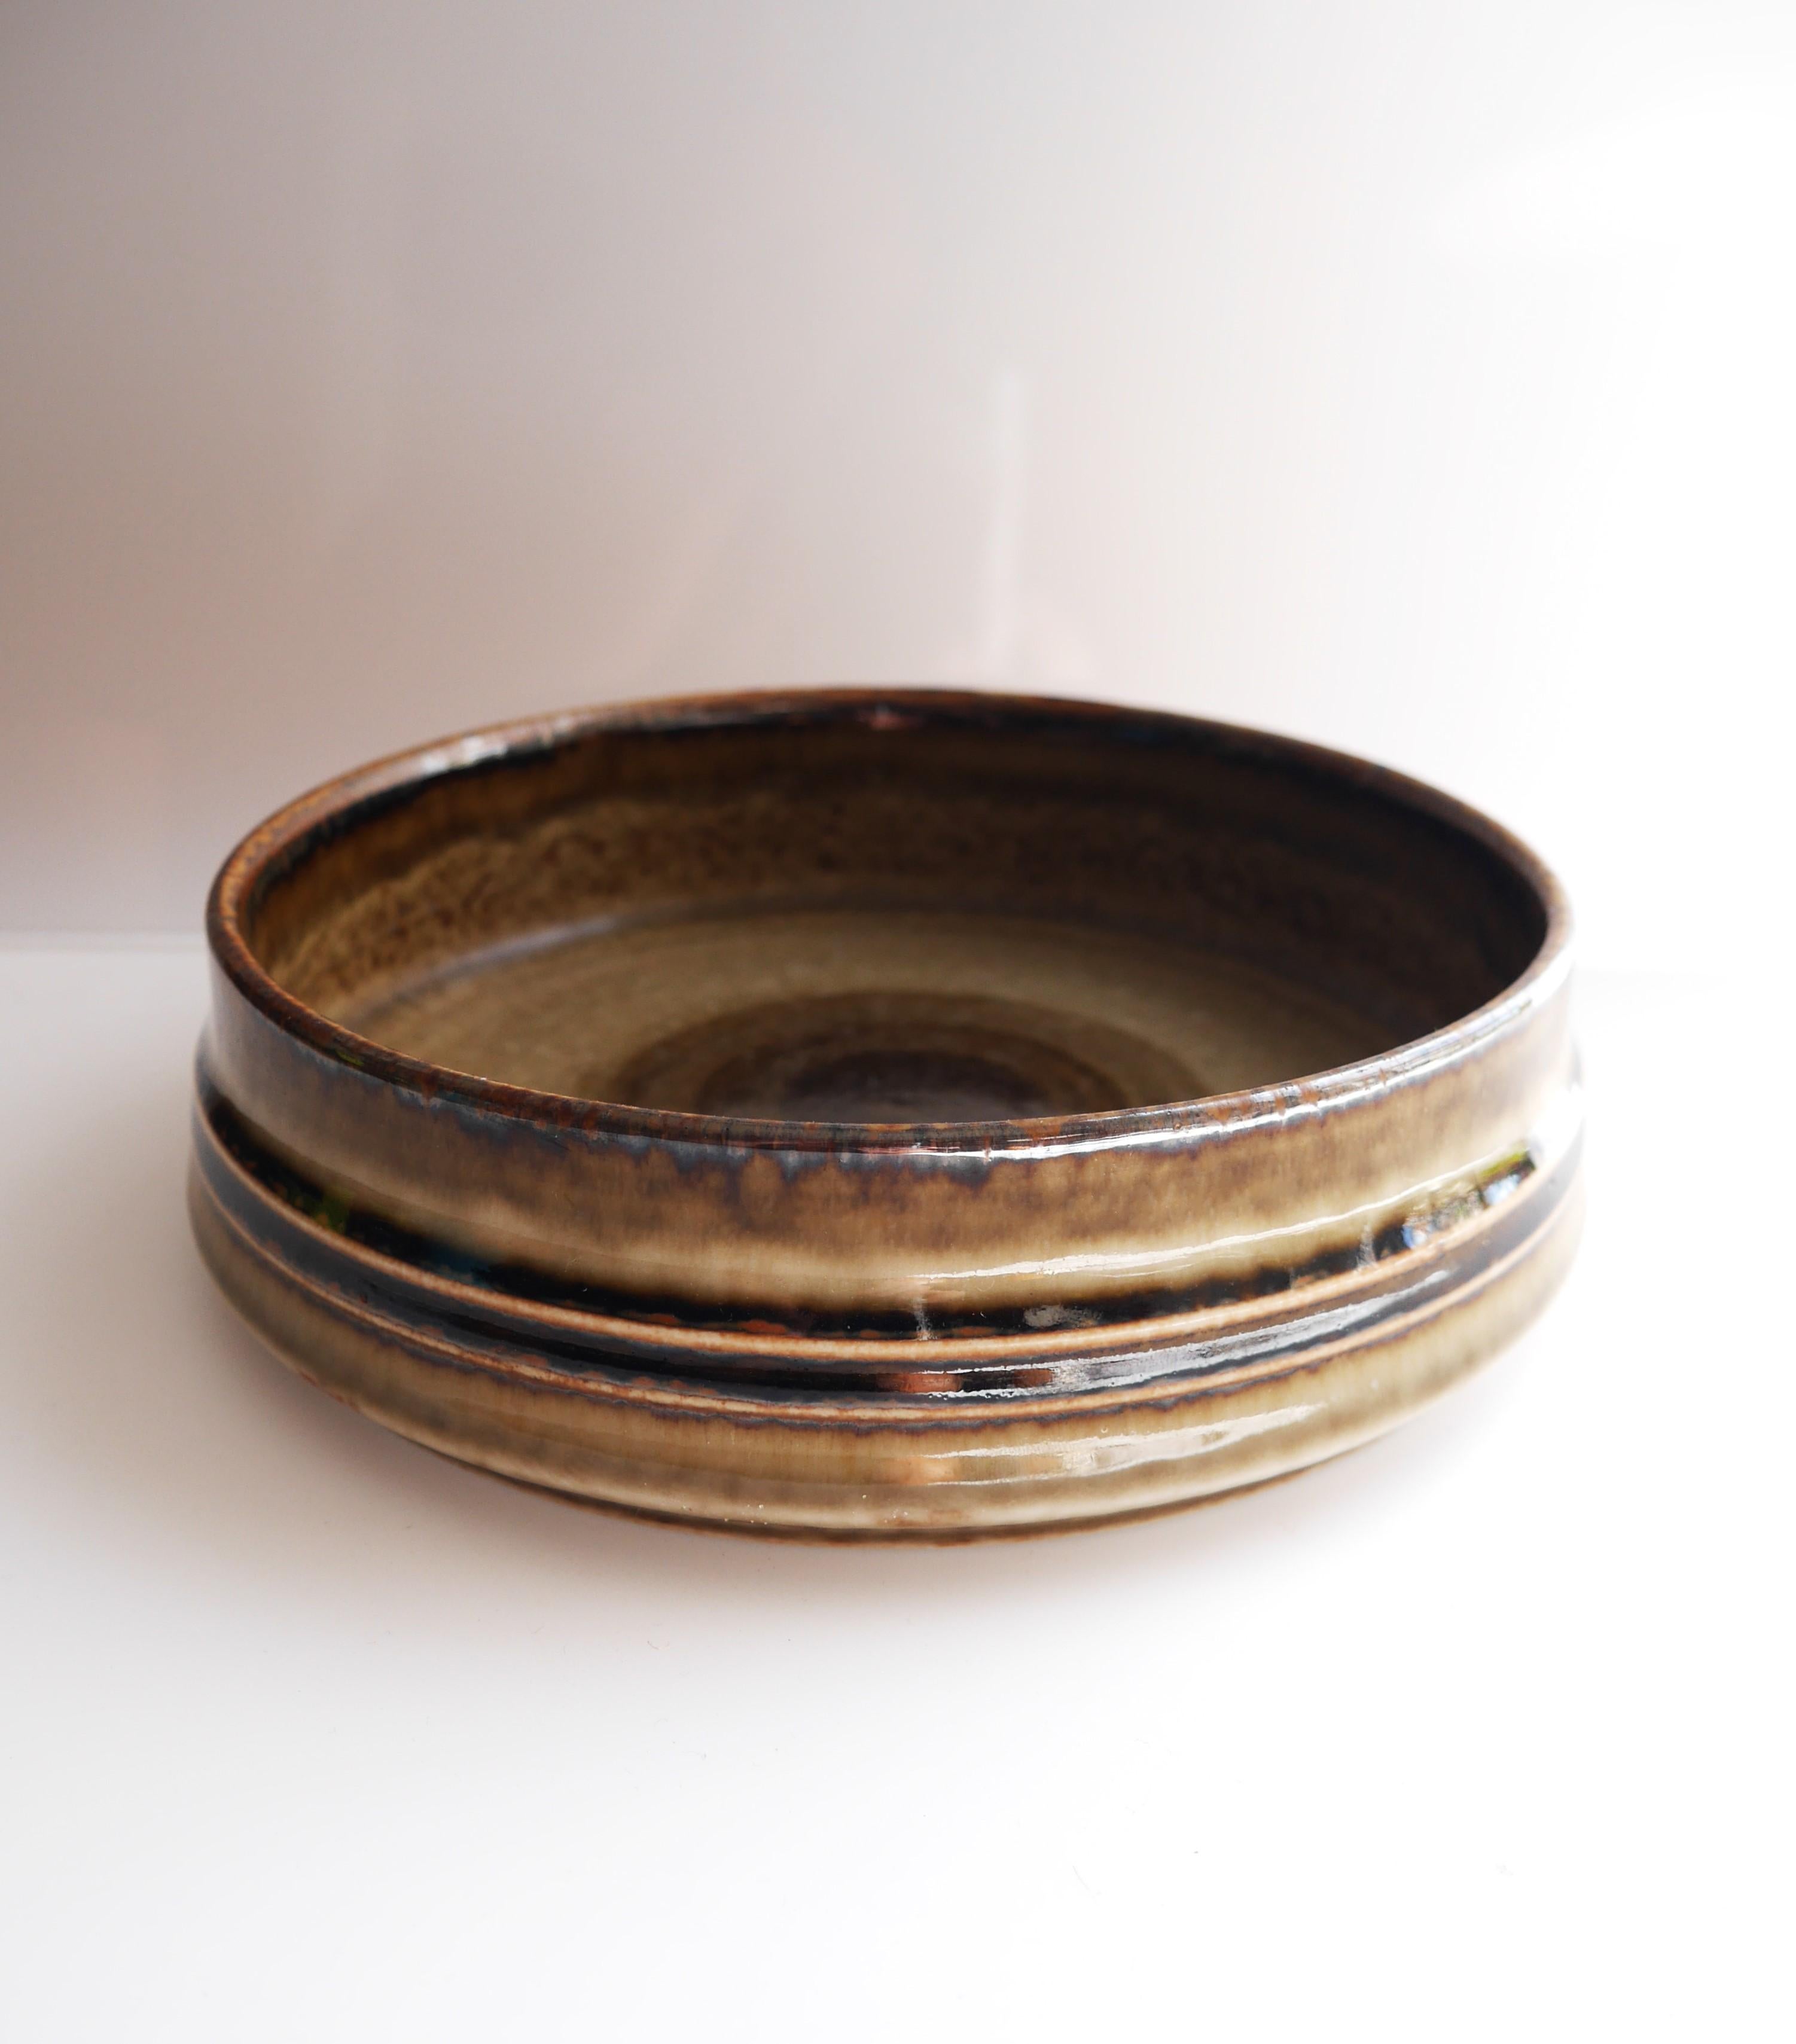 Swedish Mid-century modern pottery bowl, known as 